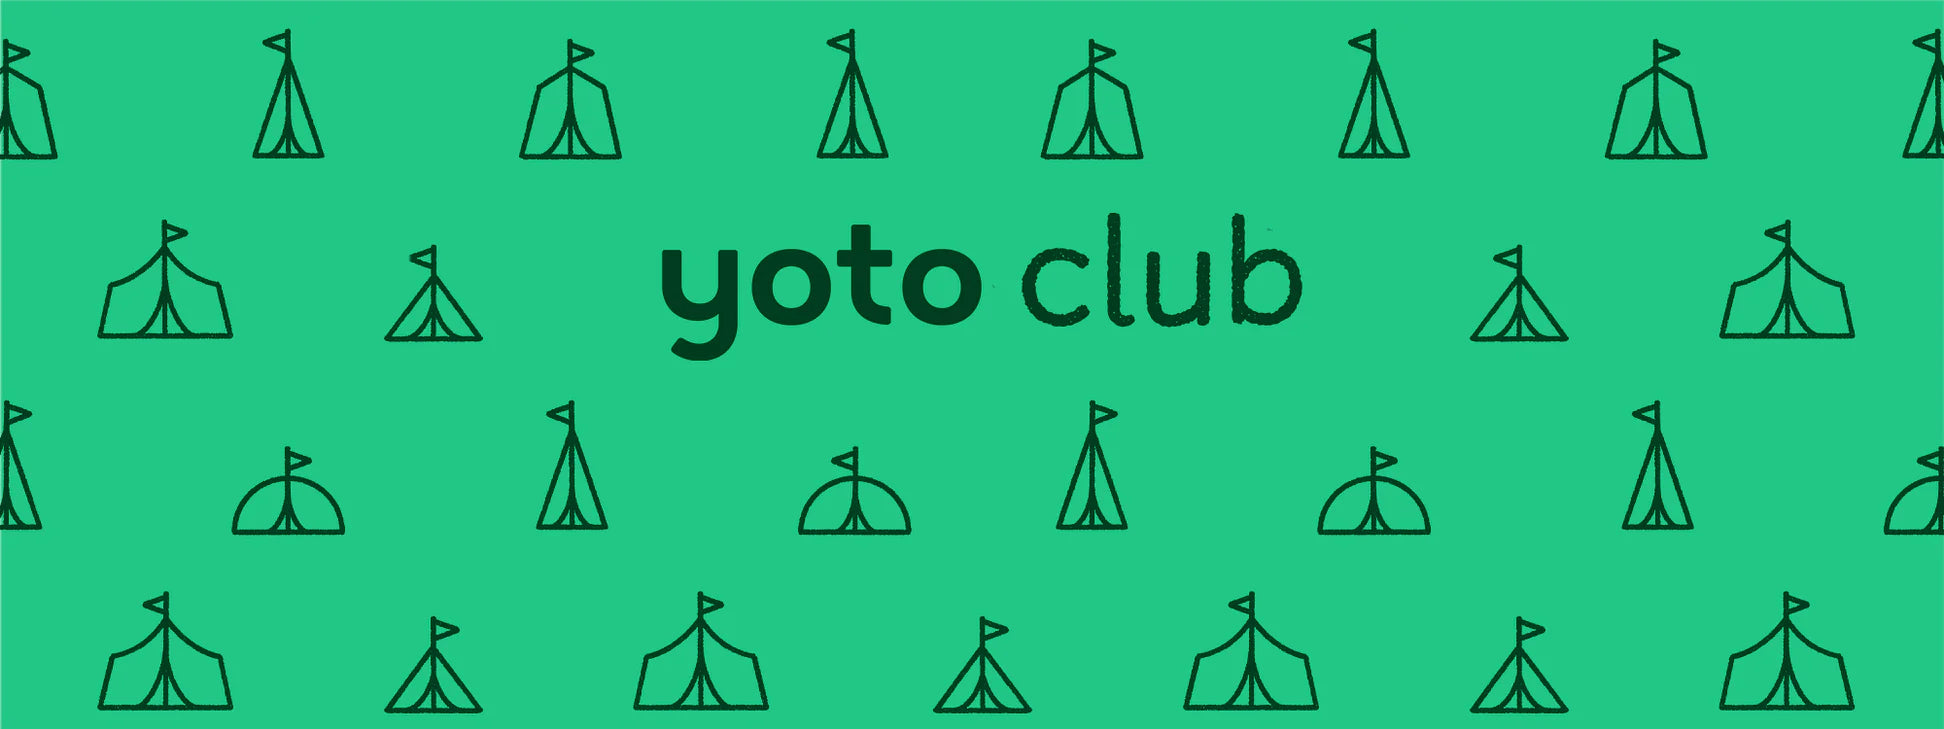 What’s new in Yoto Club this May